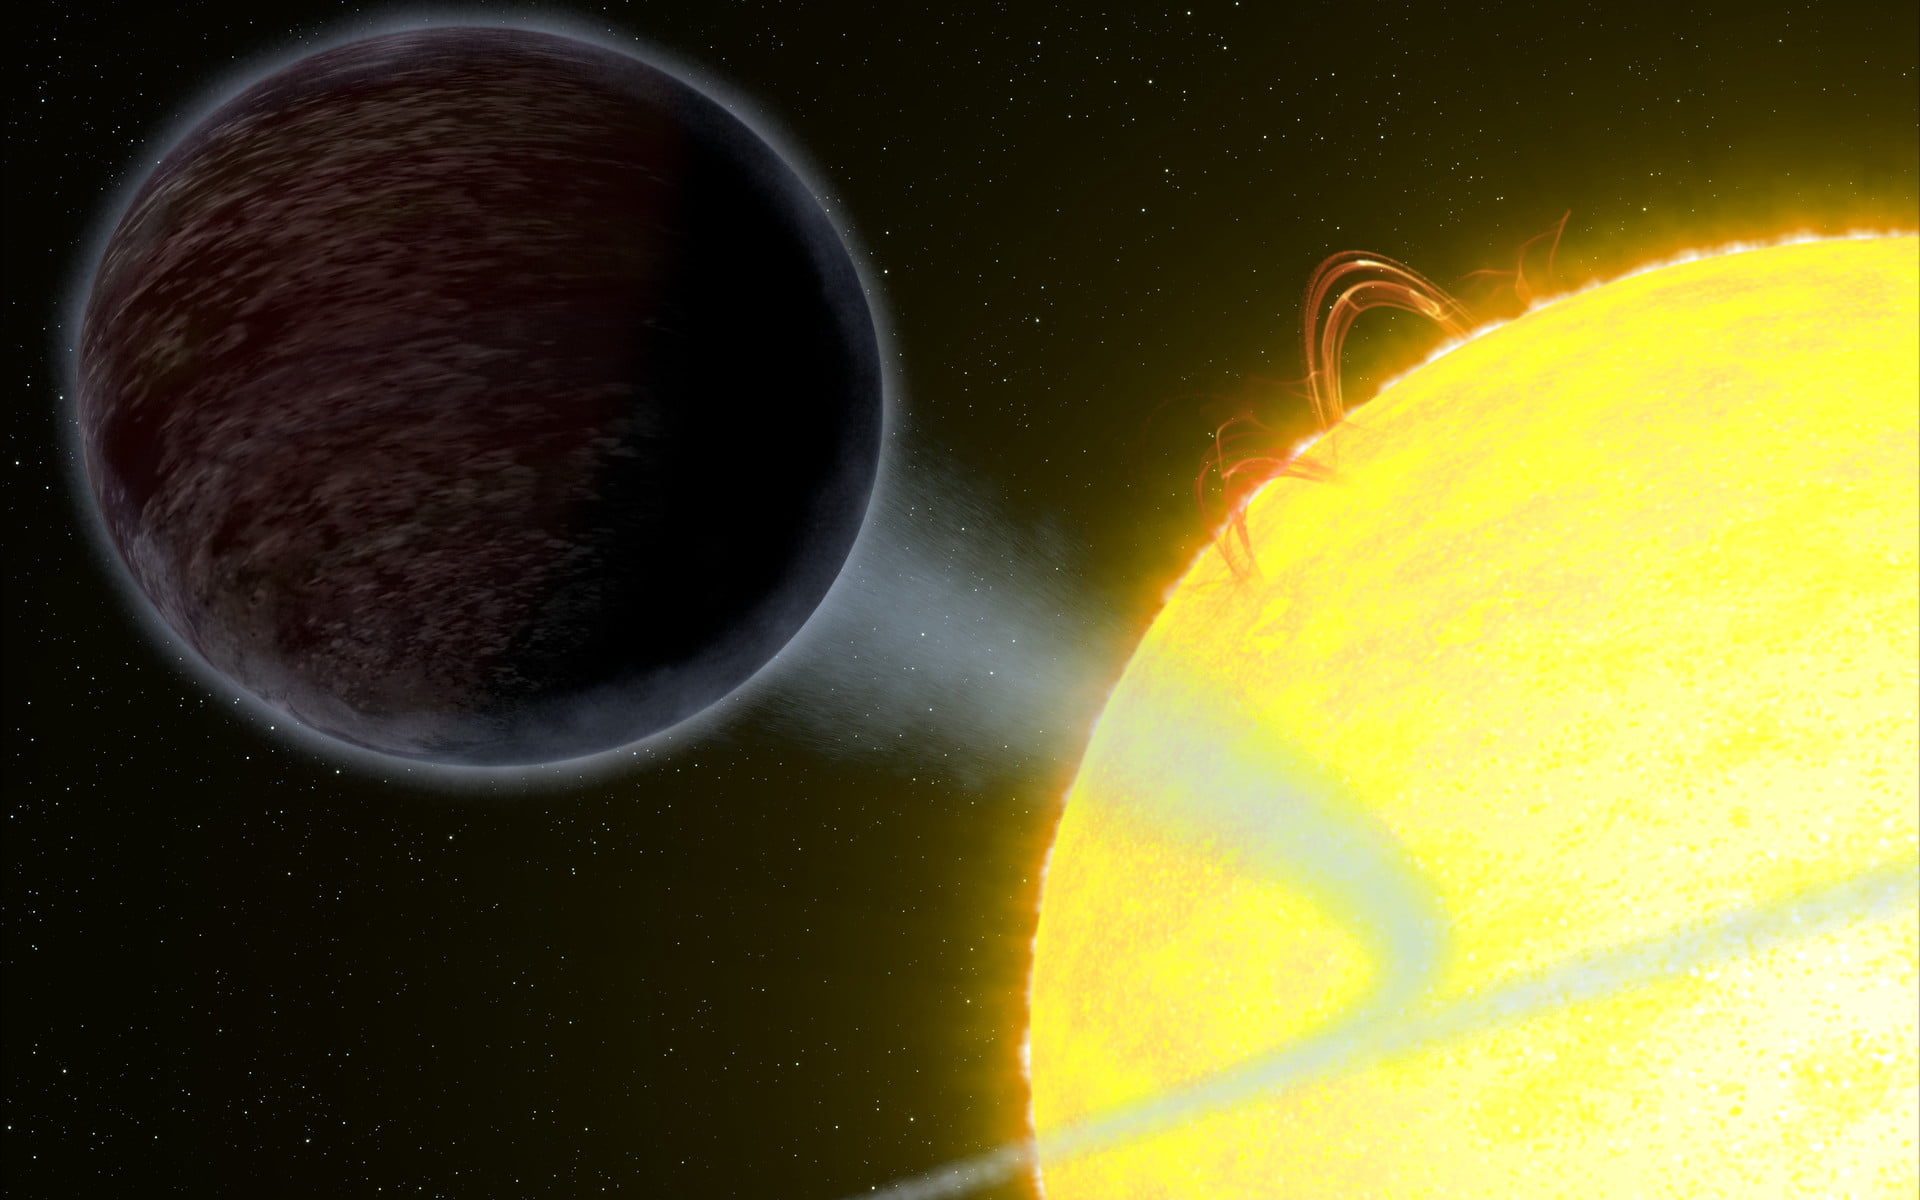 One of the blackest planets in our Galaxy will die faster than expected